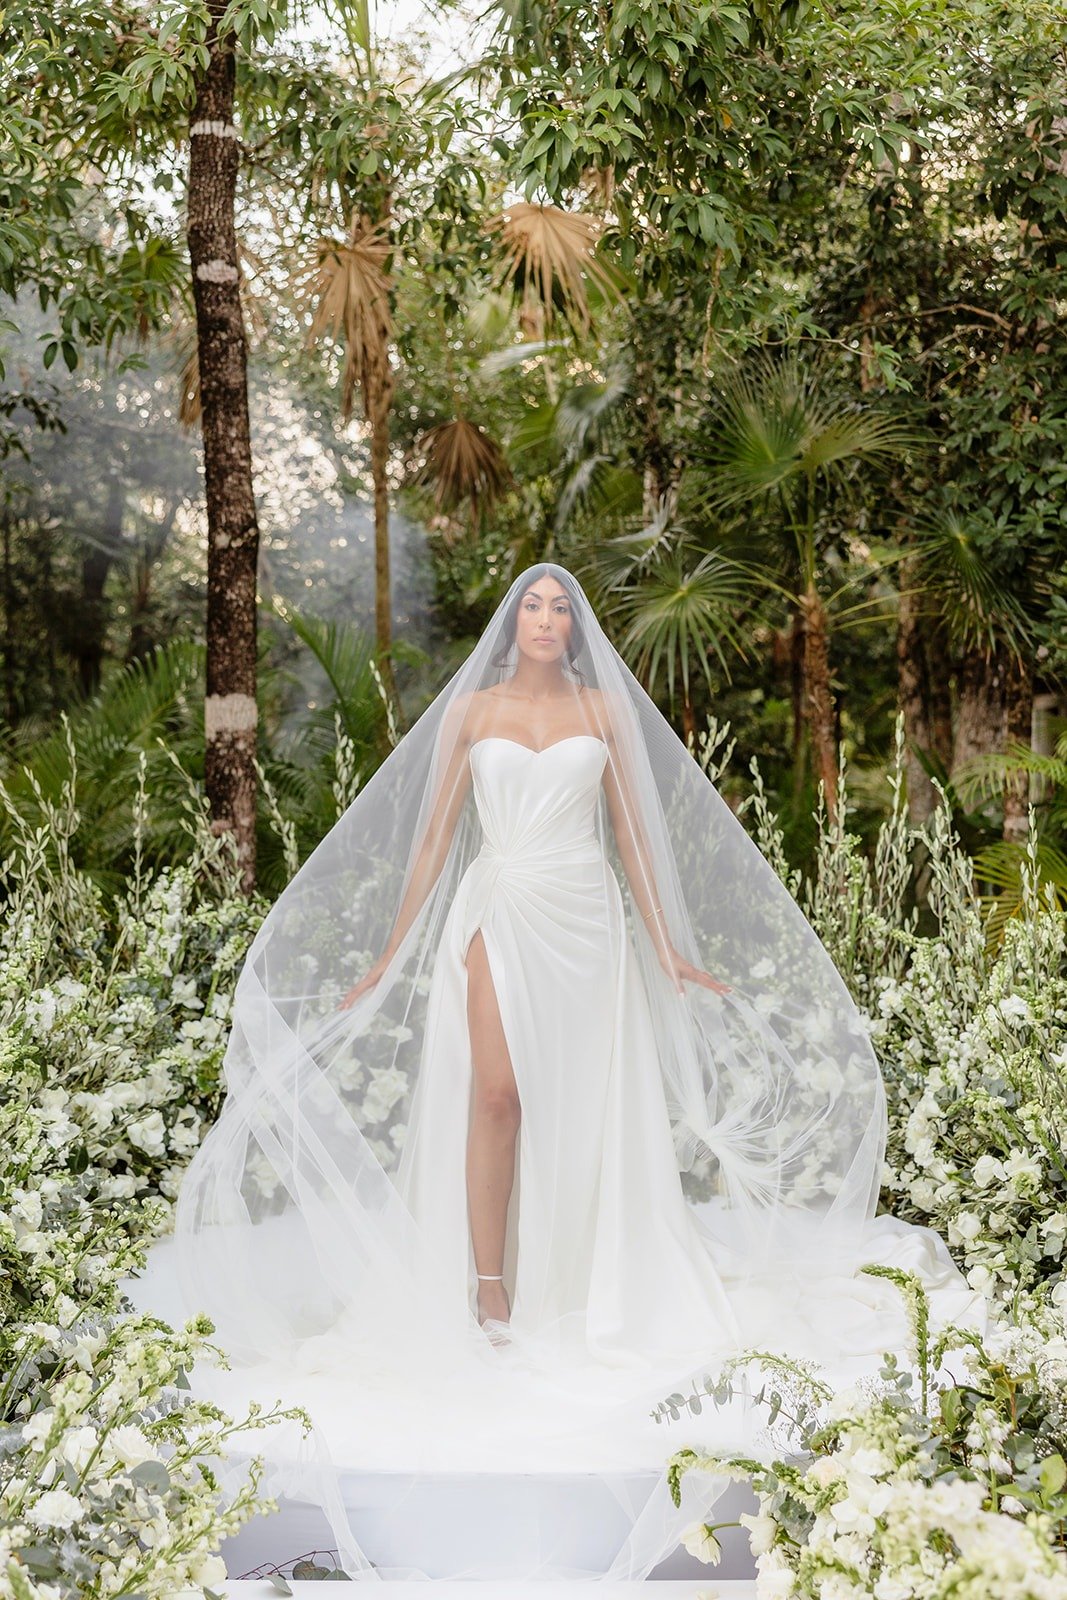 Dramatic and ethereal Anna gown by designer Galia Lahav